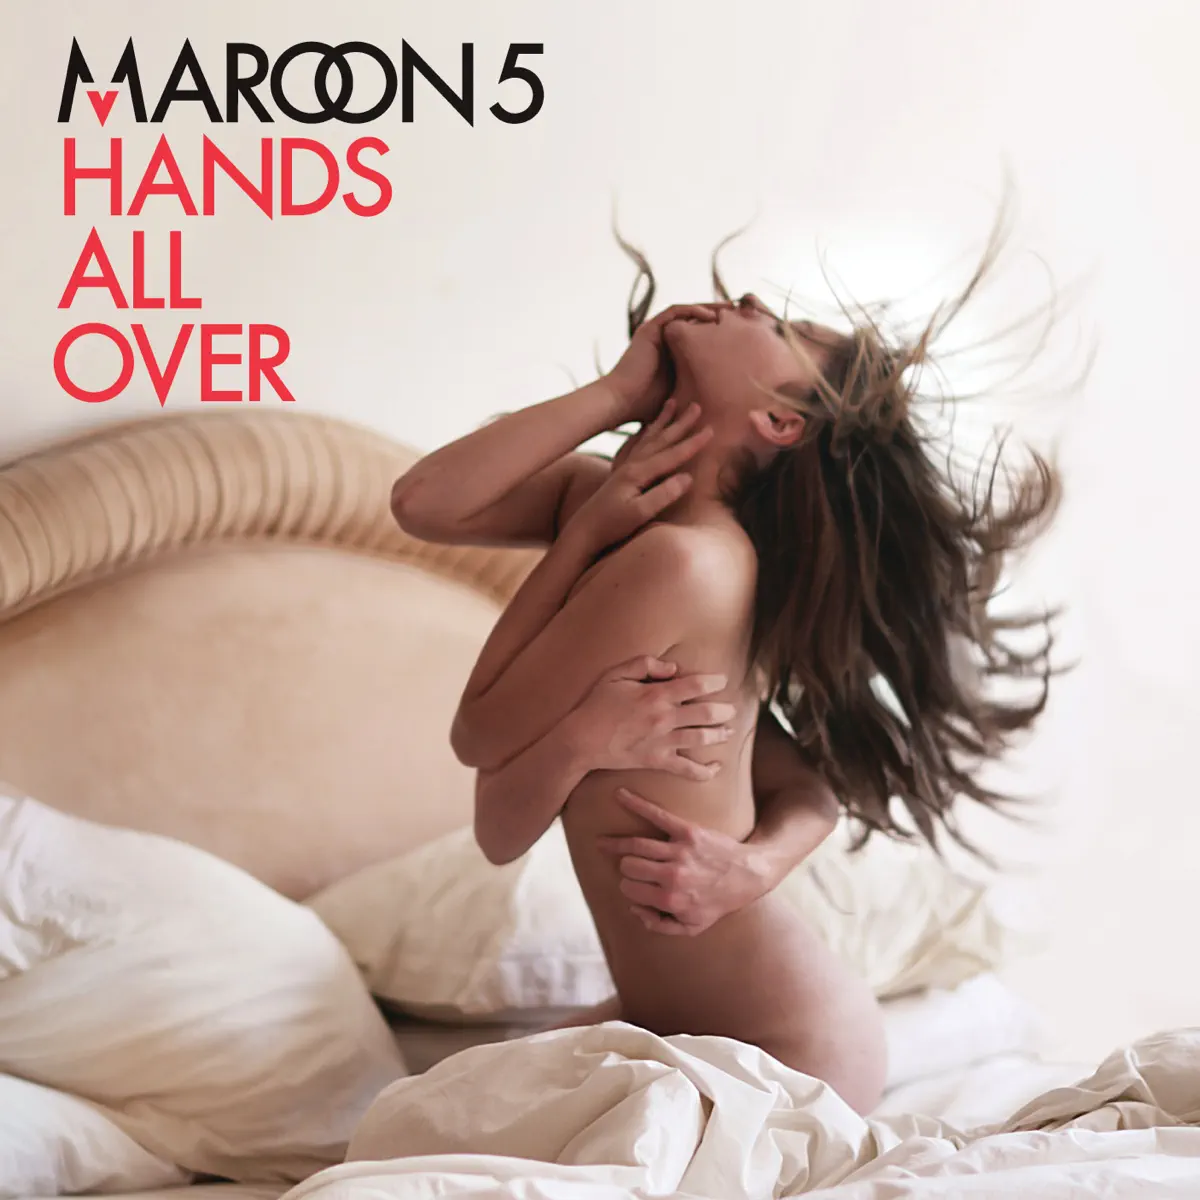 Maroon 5 - Hands All Over (2010) [iTunes Plus AAC M4A]-新房子